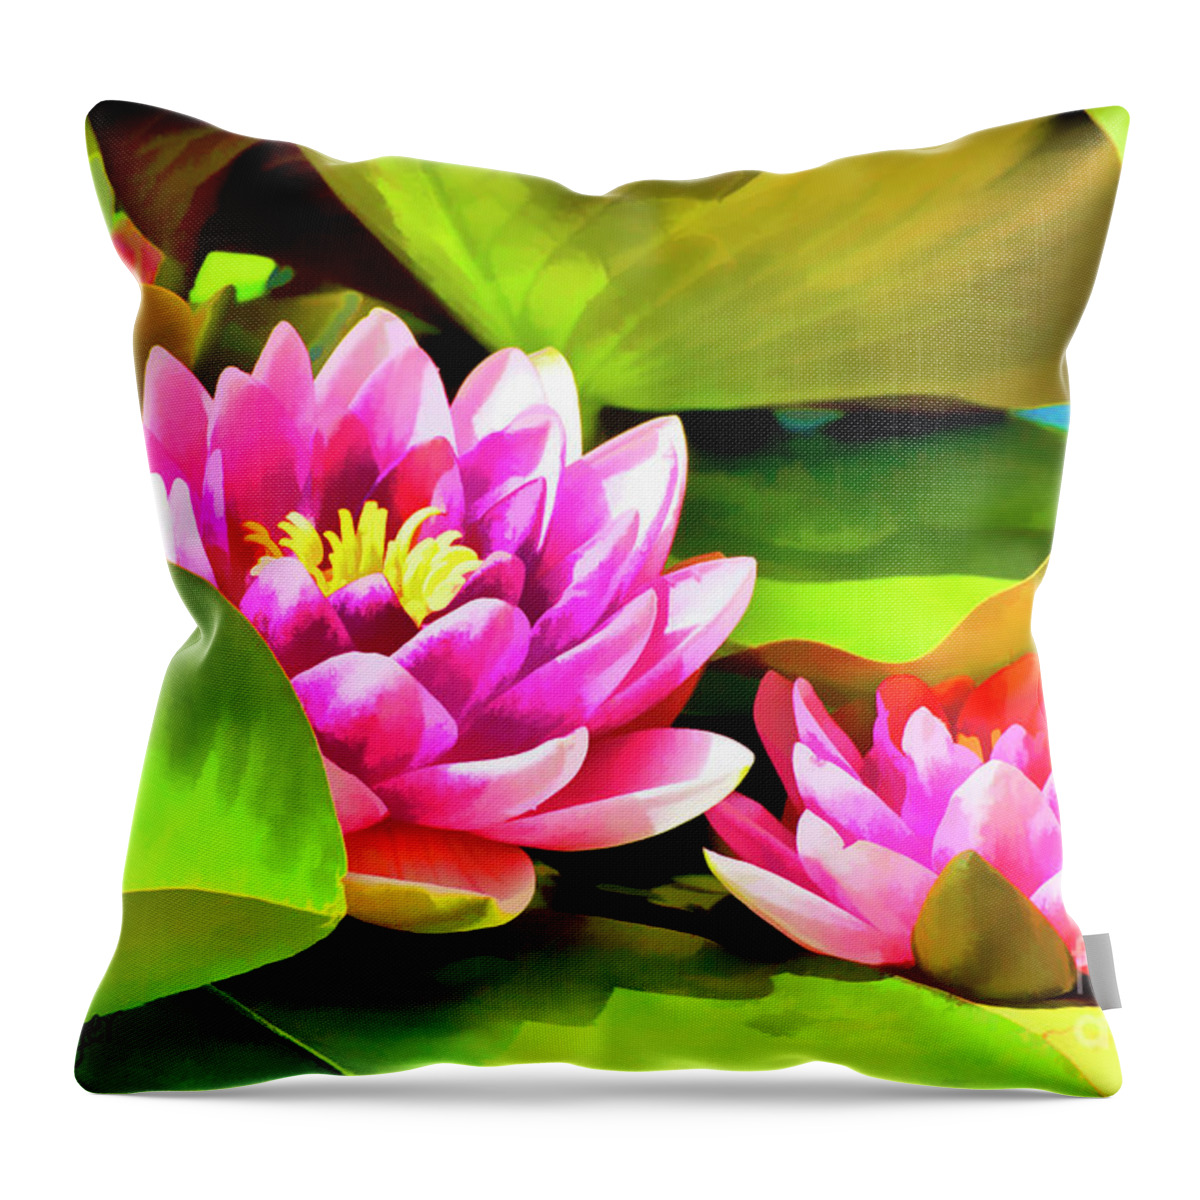  Nature Throw Pillow featuring the painting Lake Lotus by Eva Sawyer